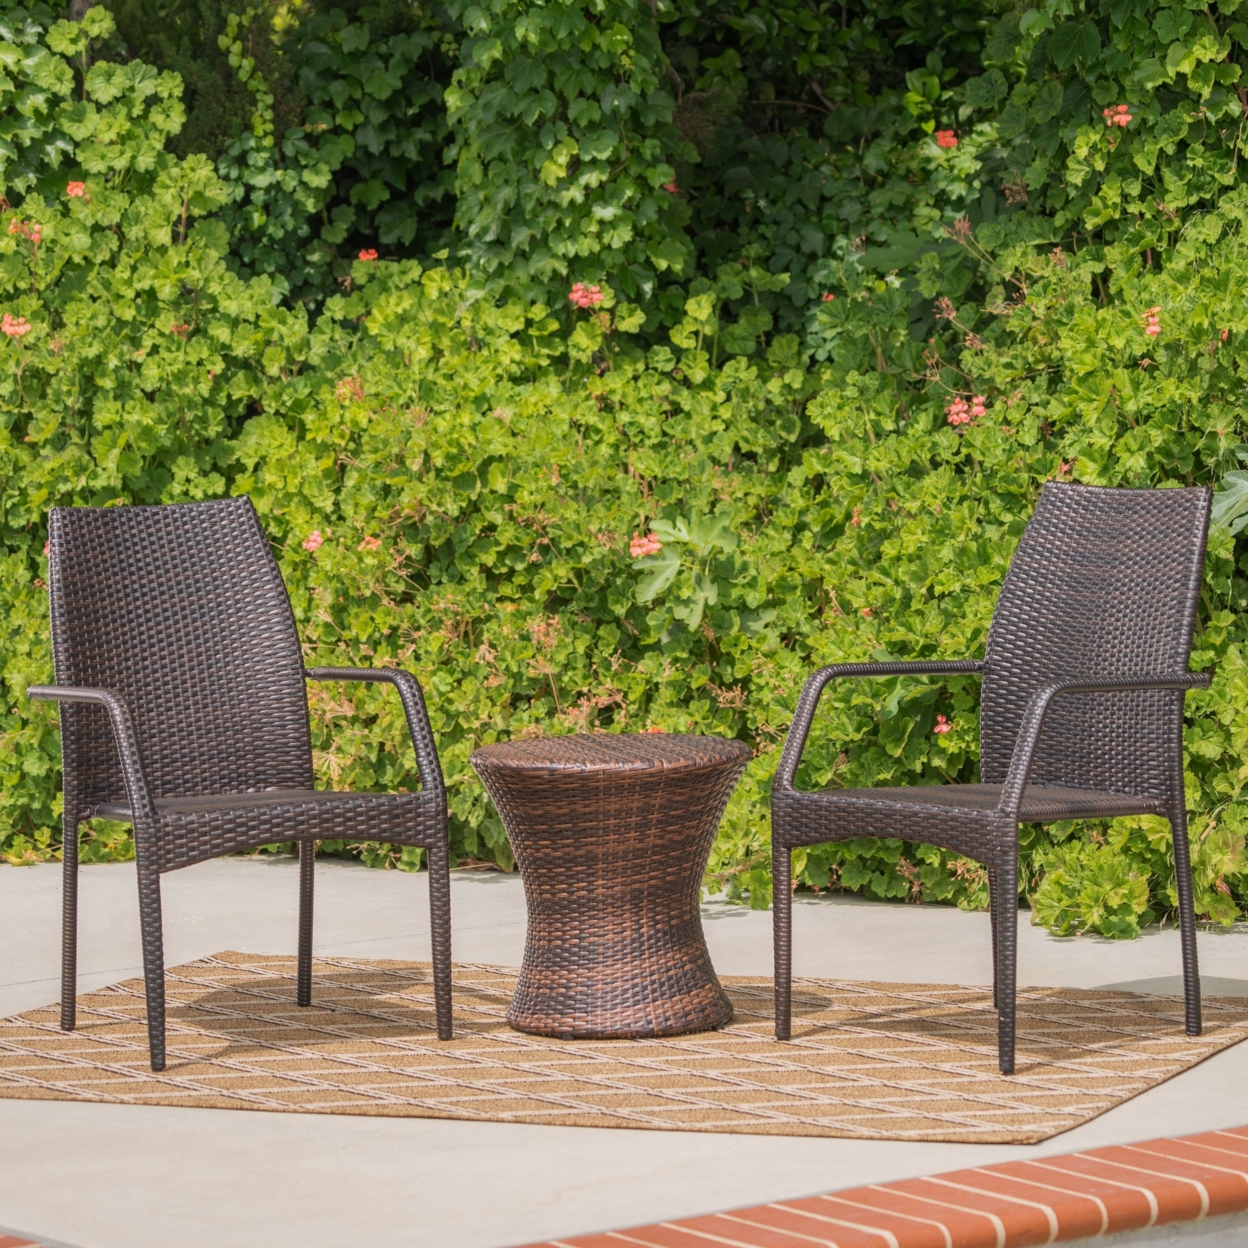 Dawson Outdoor 3 Piece Multi-brown Wicker Stacking Chair Chat Set - Hour Glass Table, Brown